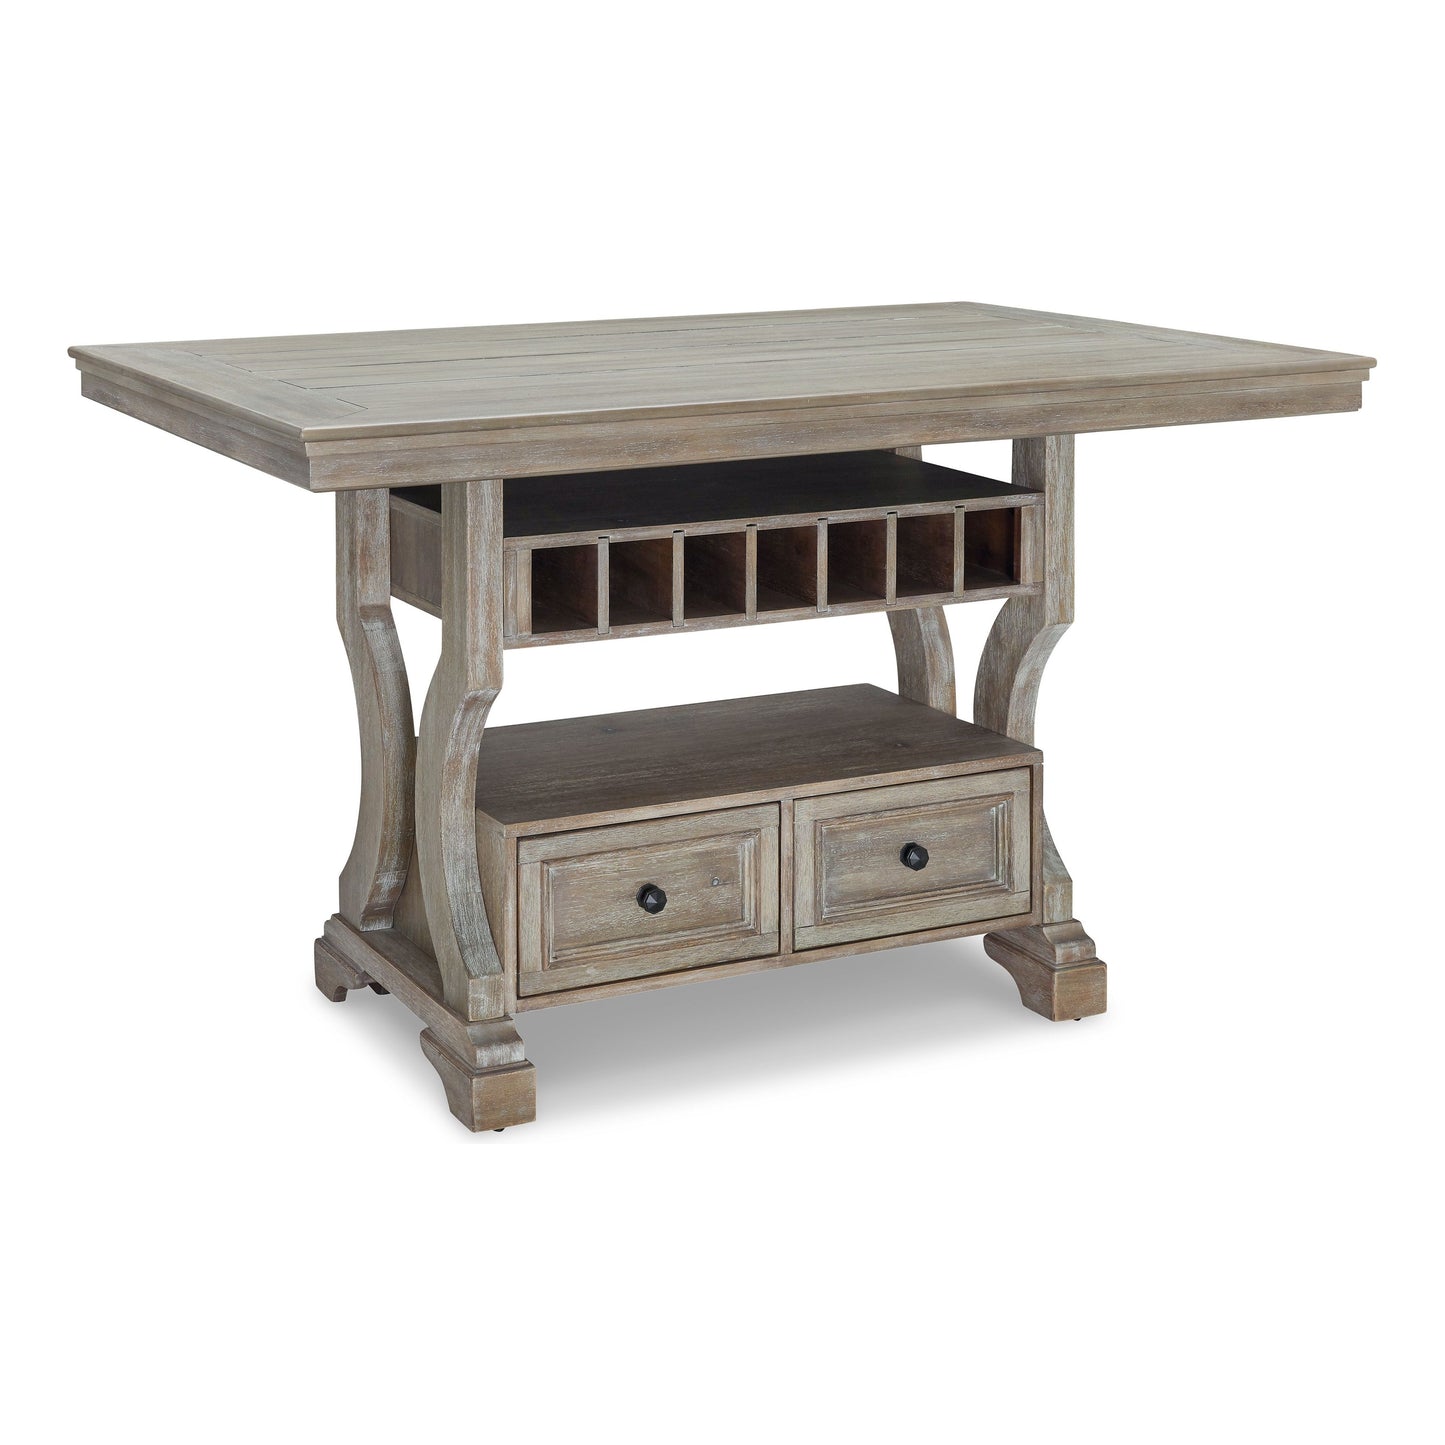 MORESHIRE COUNTER TABLE - BISQUE